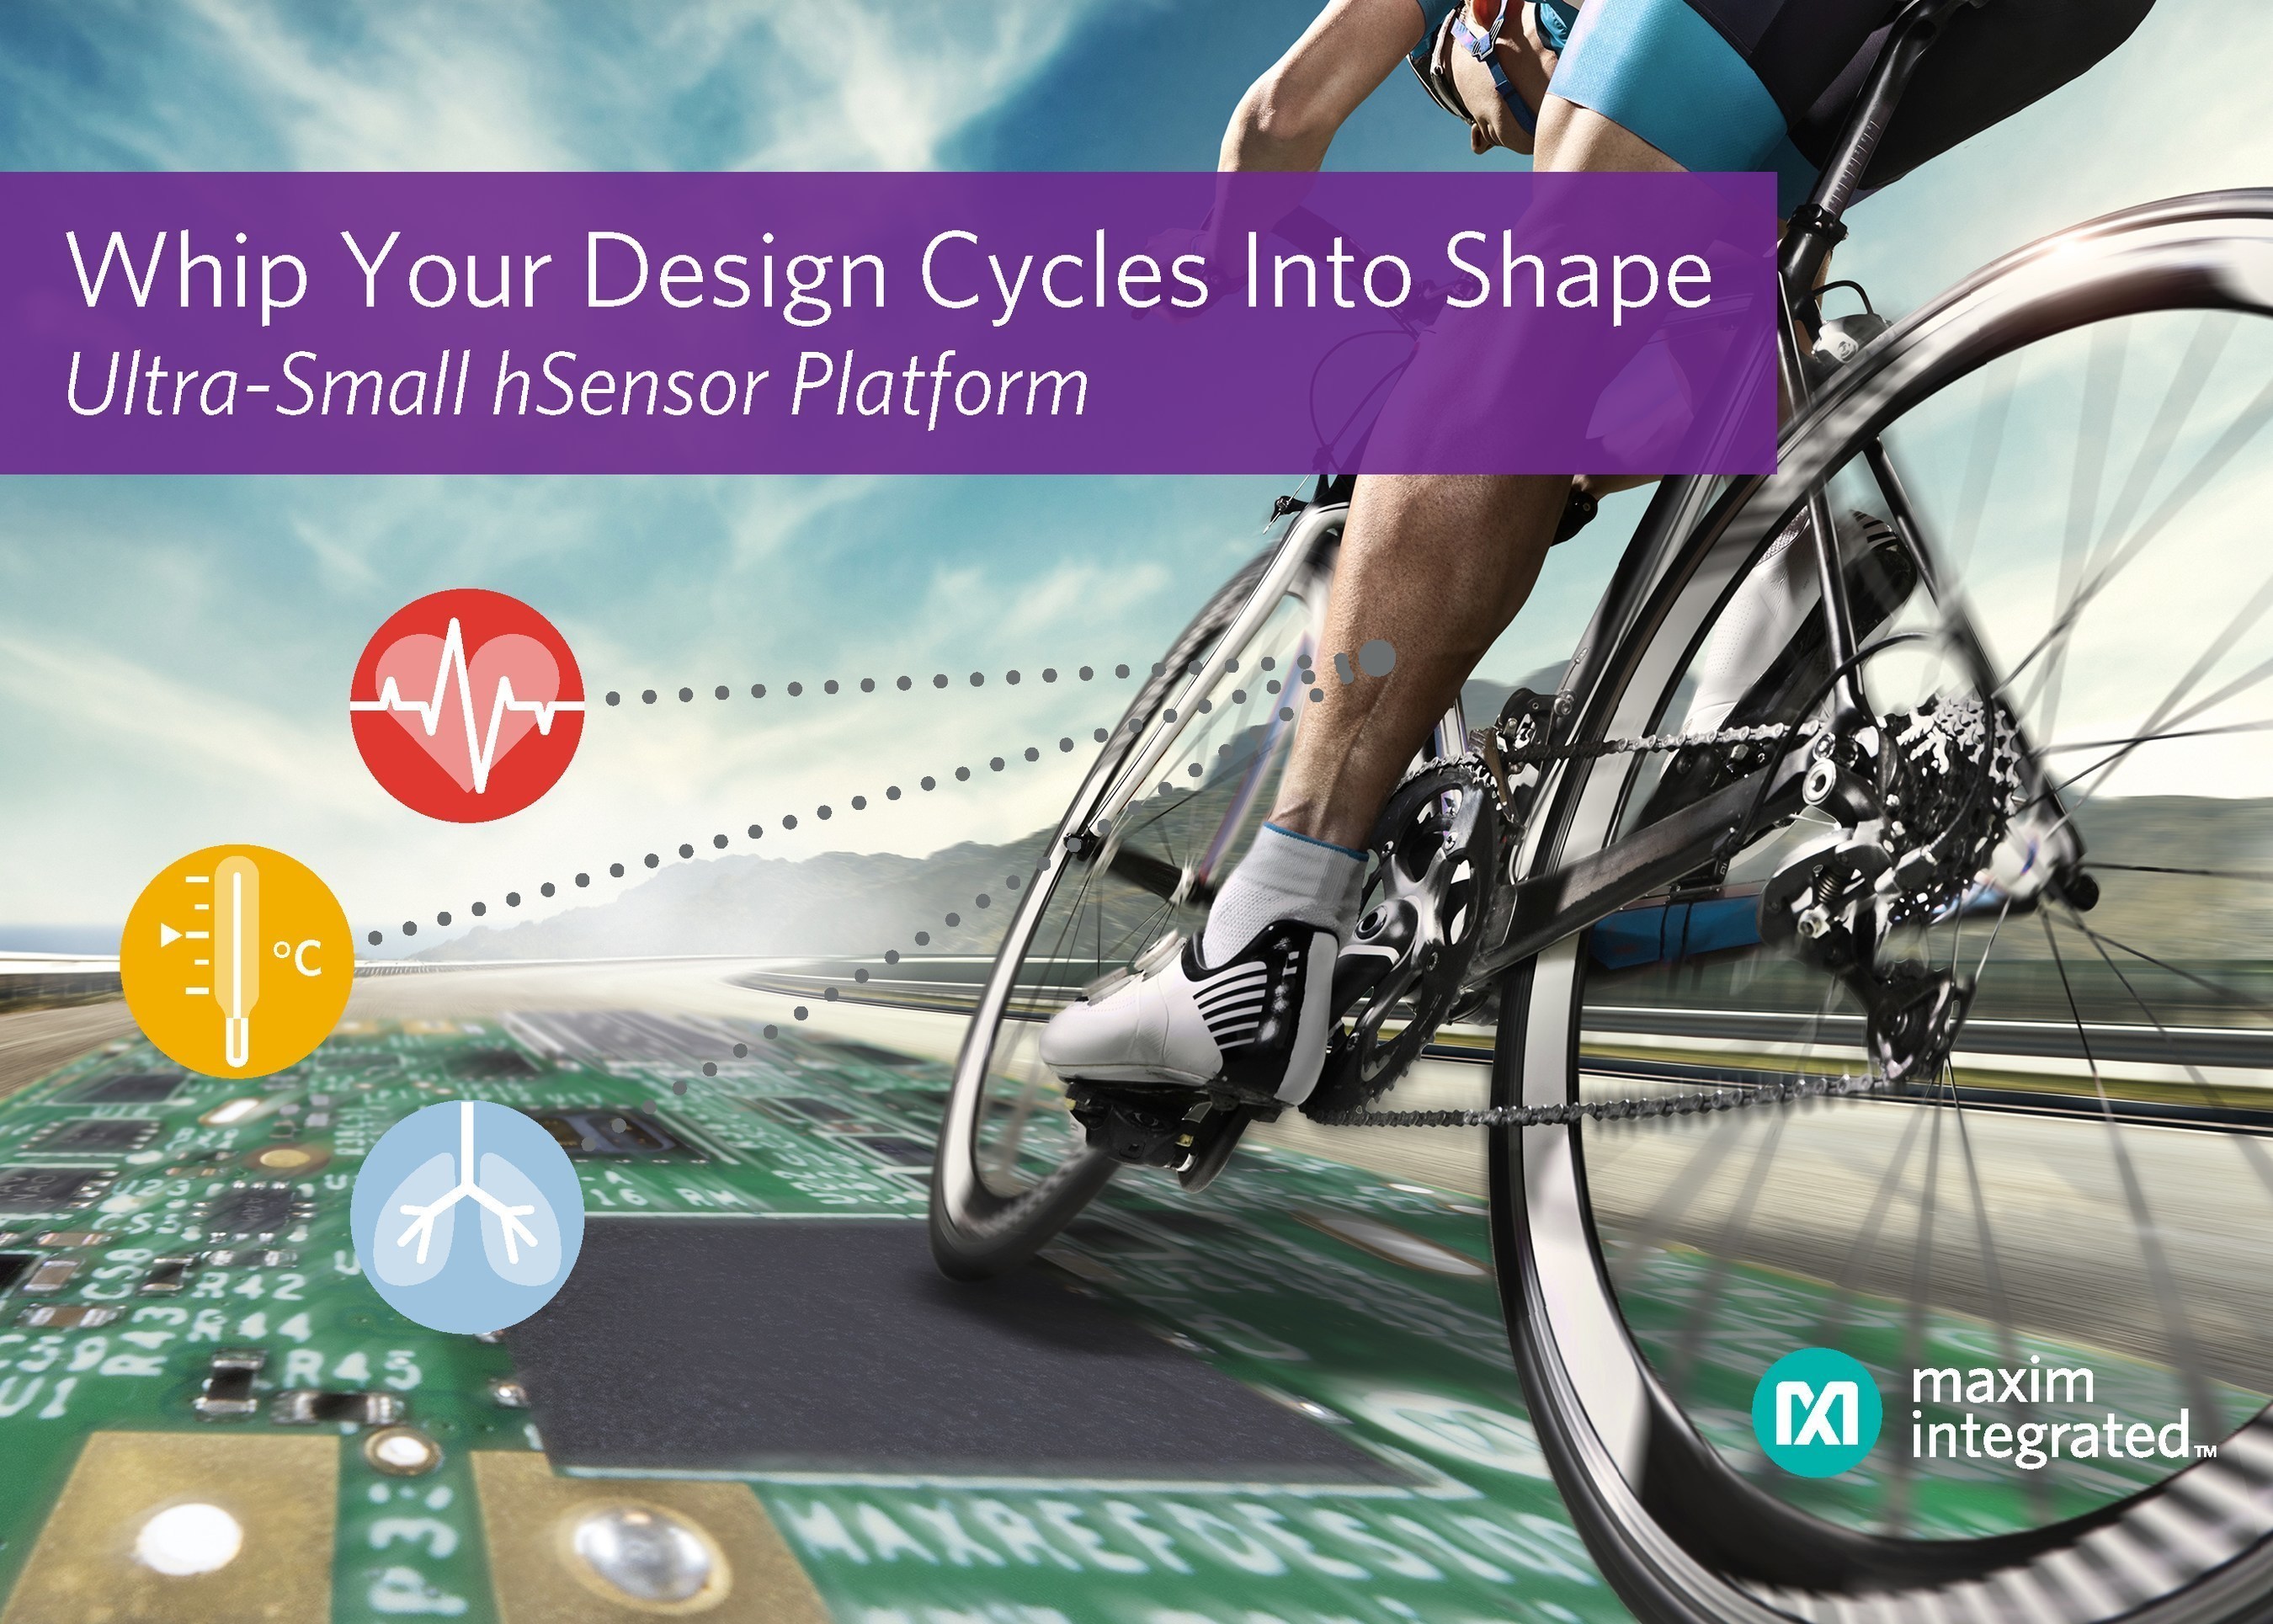 Maxim Integrated's hSensor Platform for Wearable Health and Fitness Applications